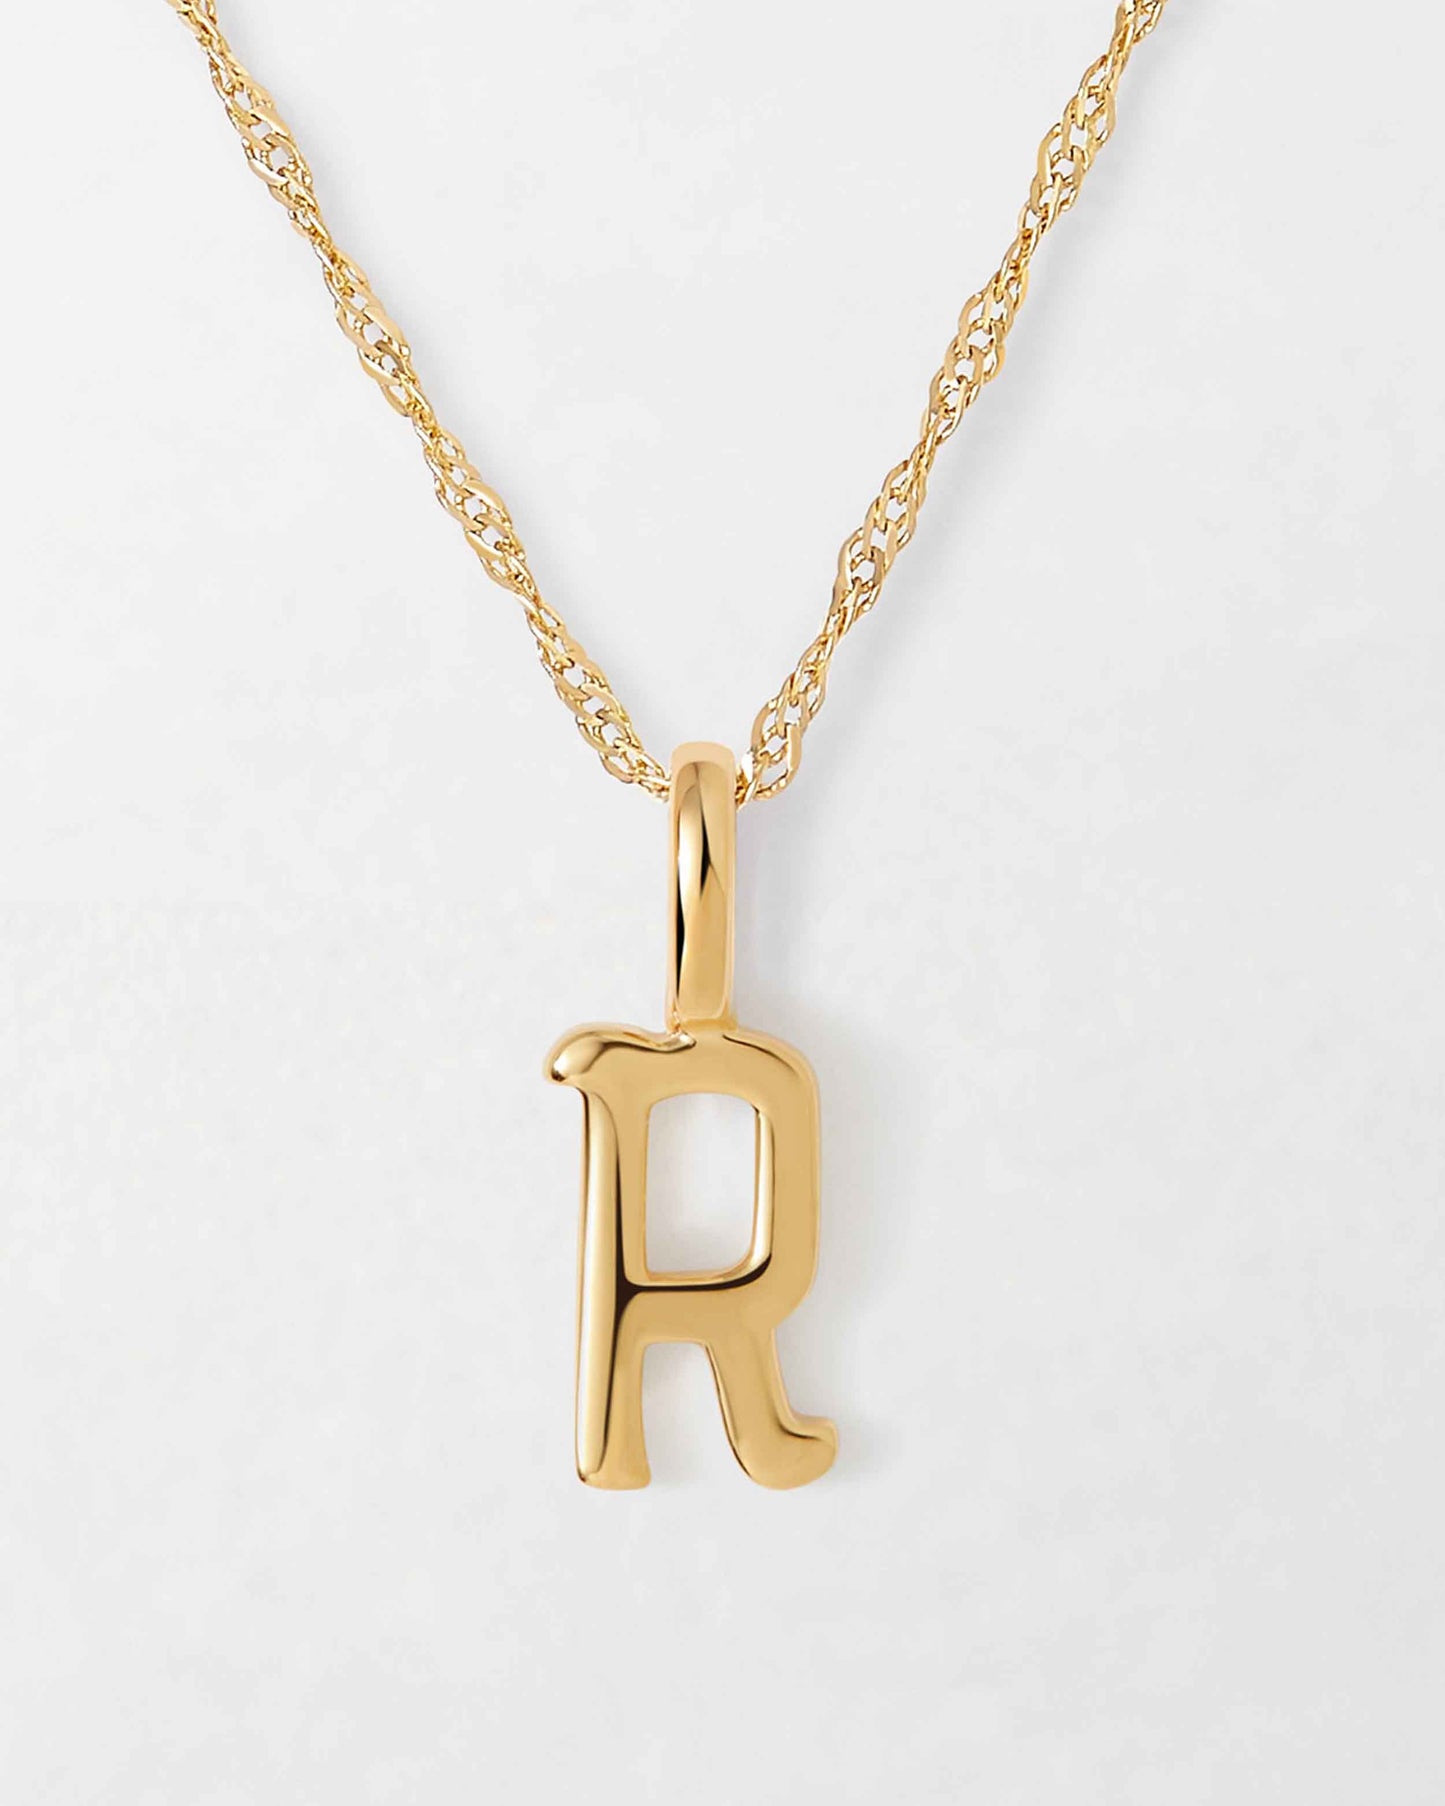 Solid Gold Initial Necklace